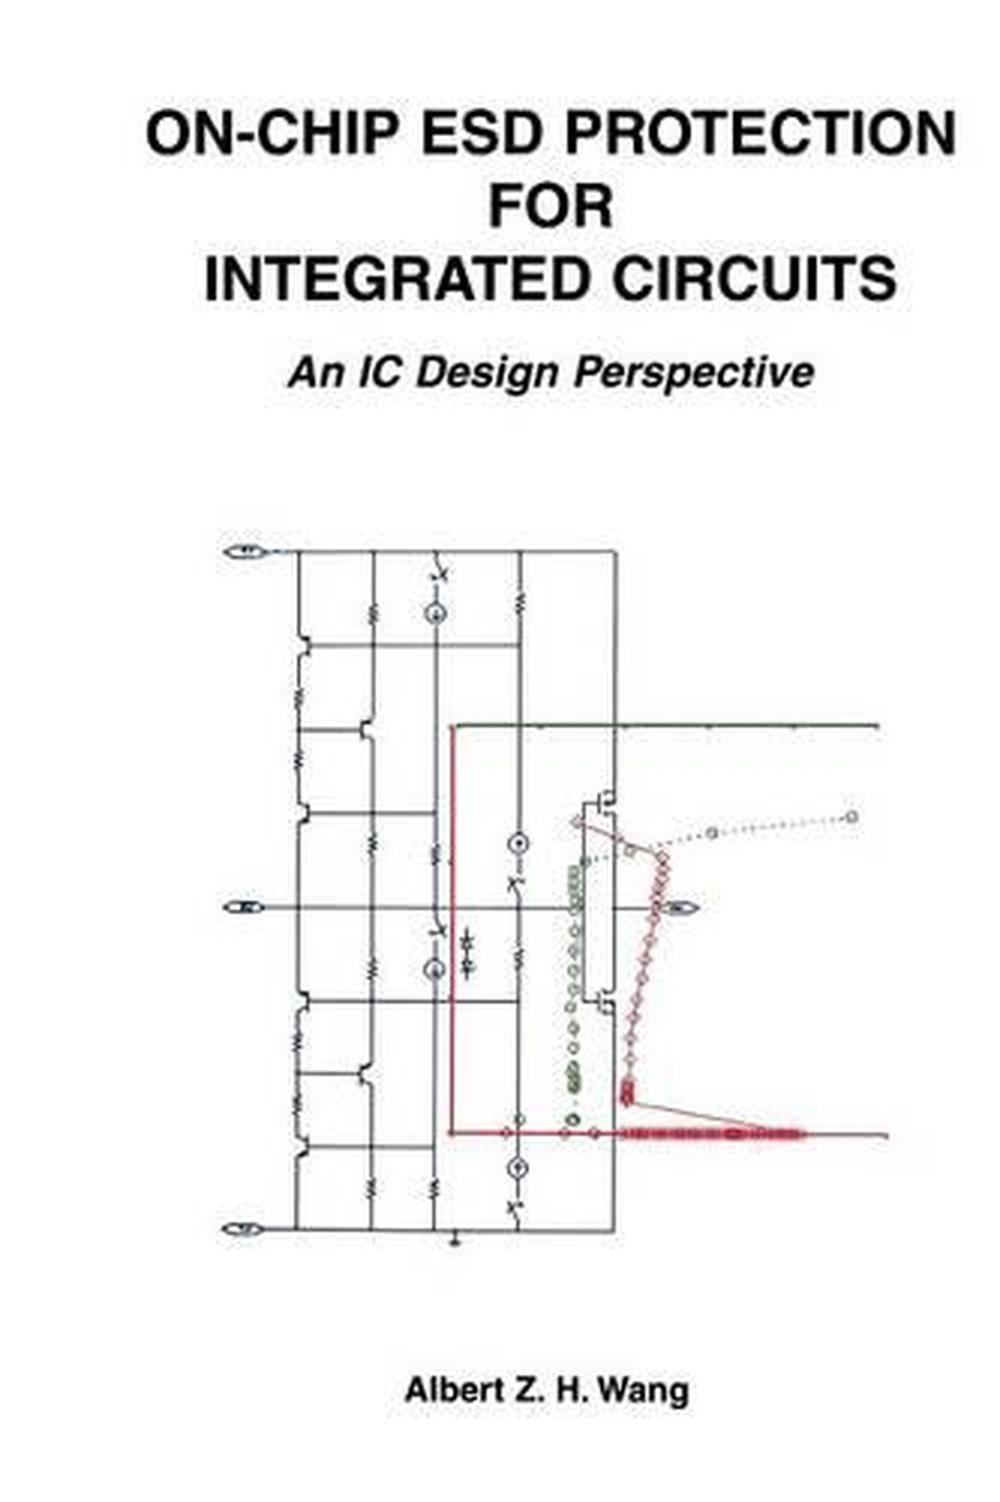 OnChip ESD Protection for Integrated Circuits An IC Design Perspective by Albe 9781475775747